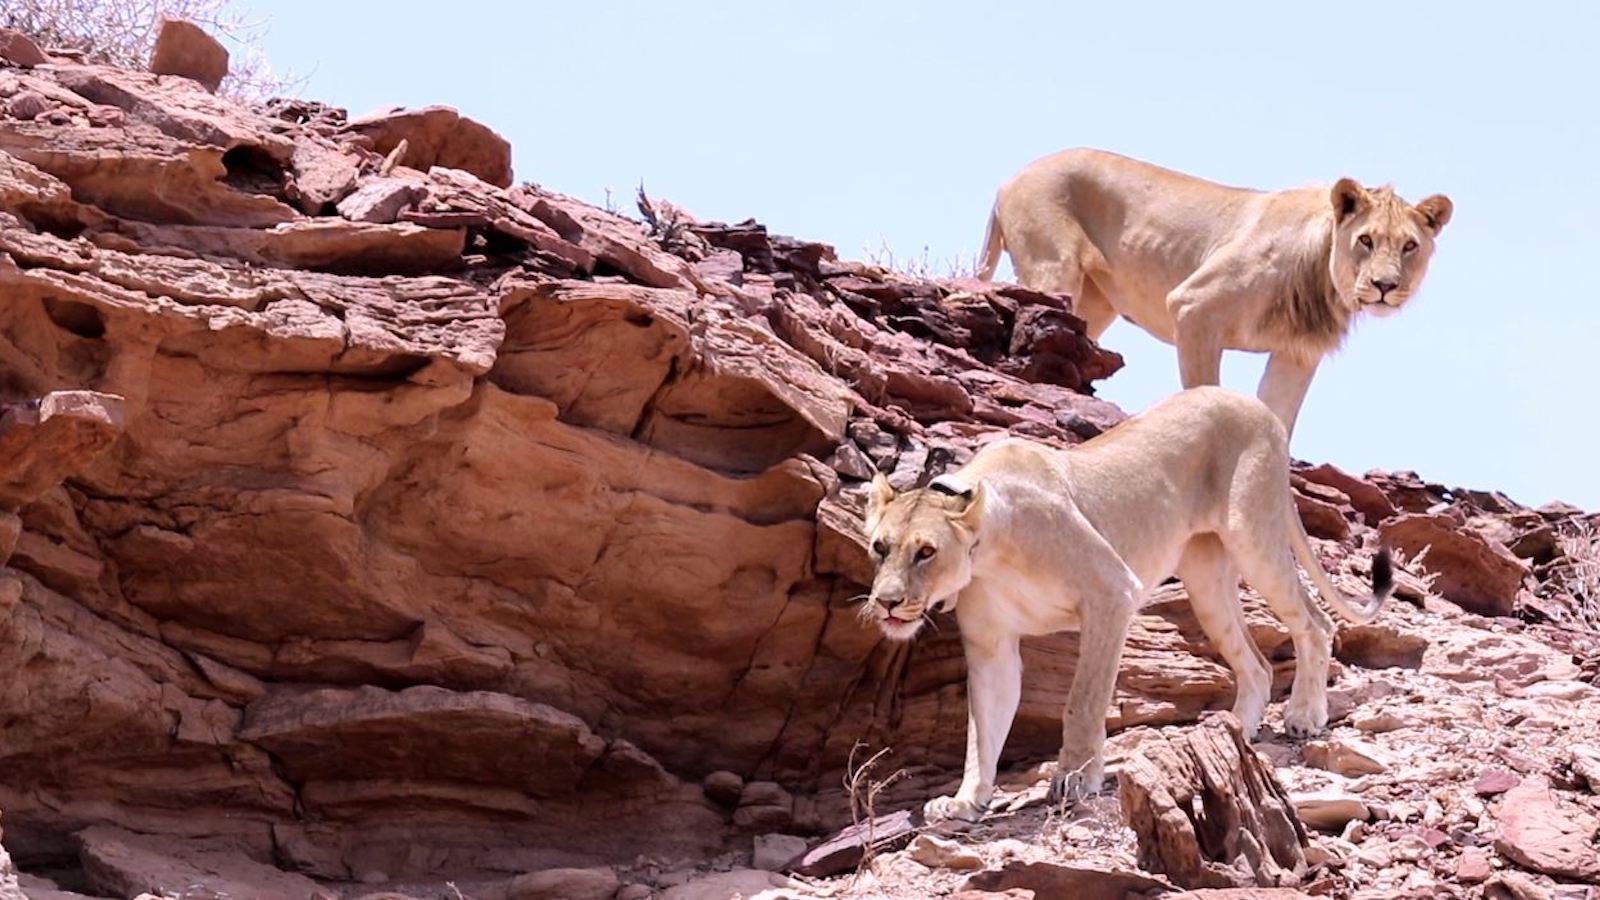 Two desert-adapted lions walk down a rocky path.